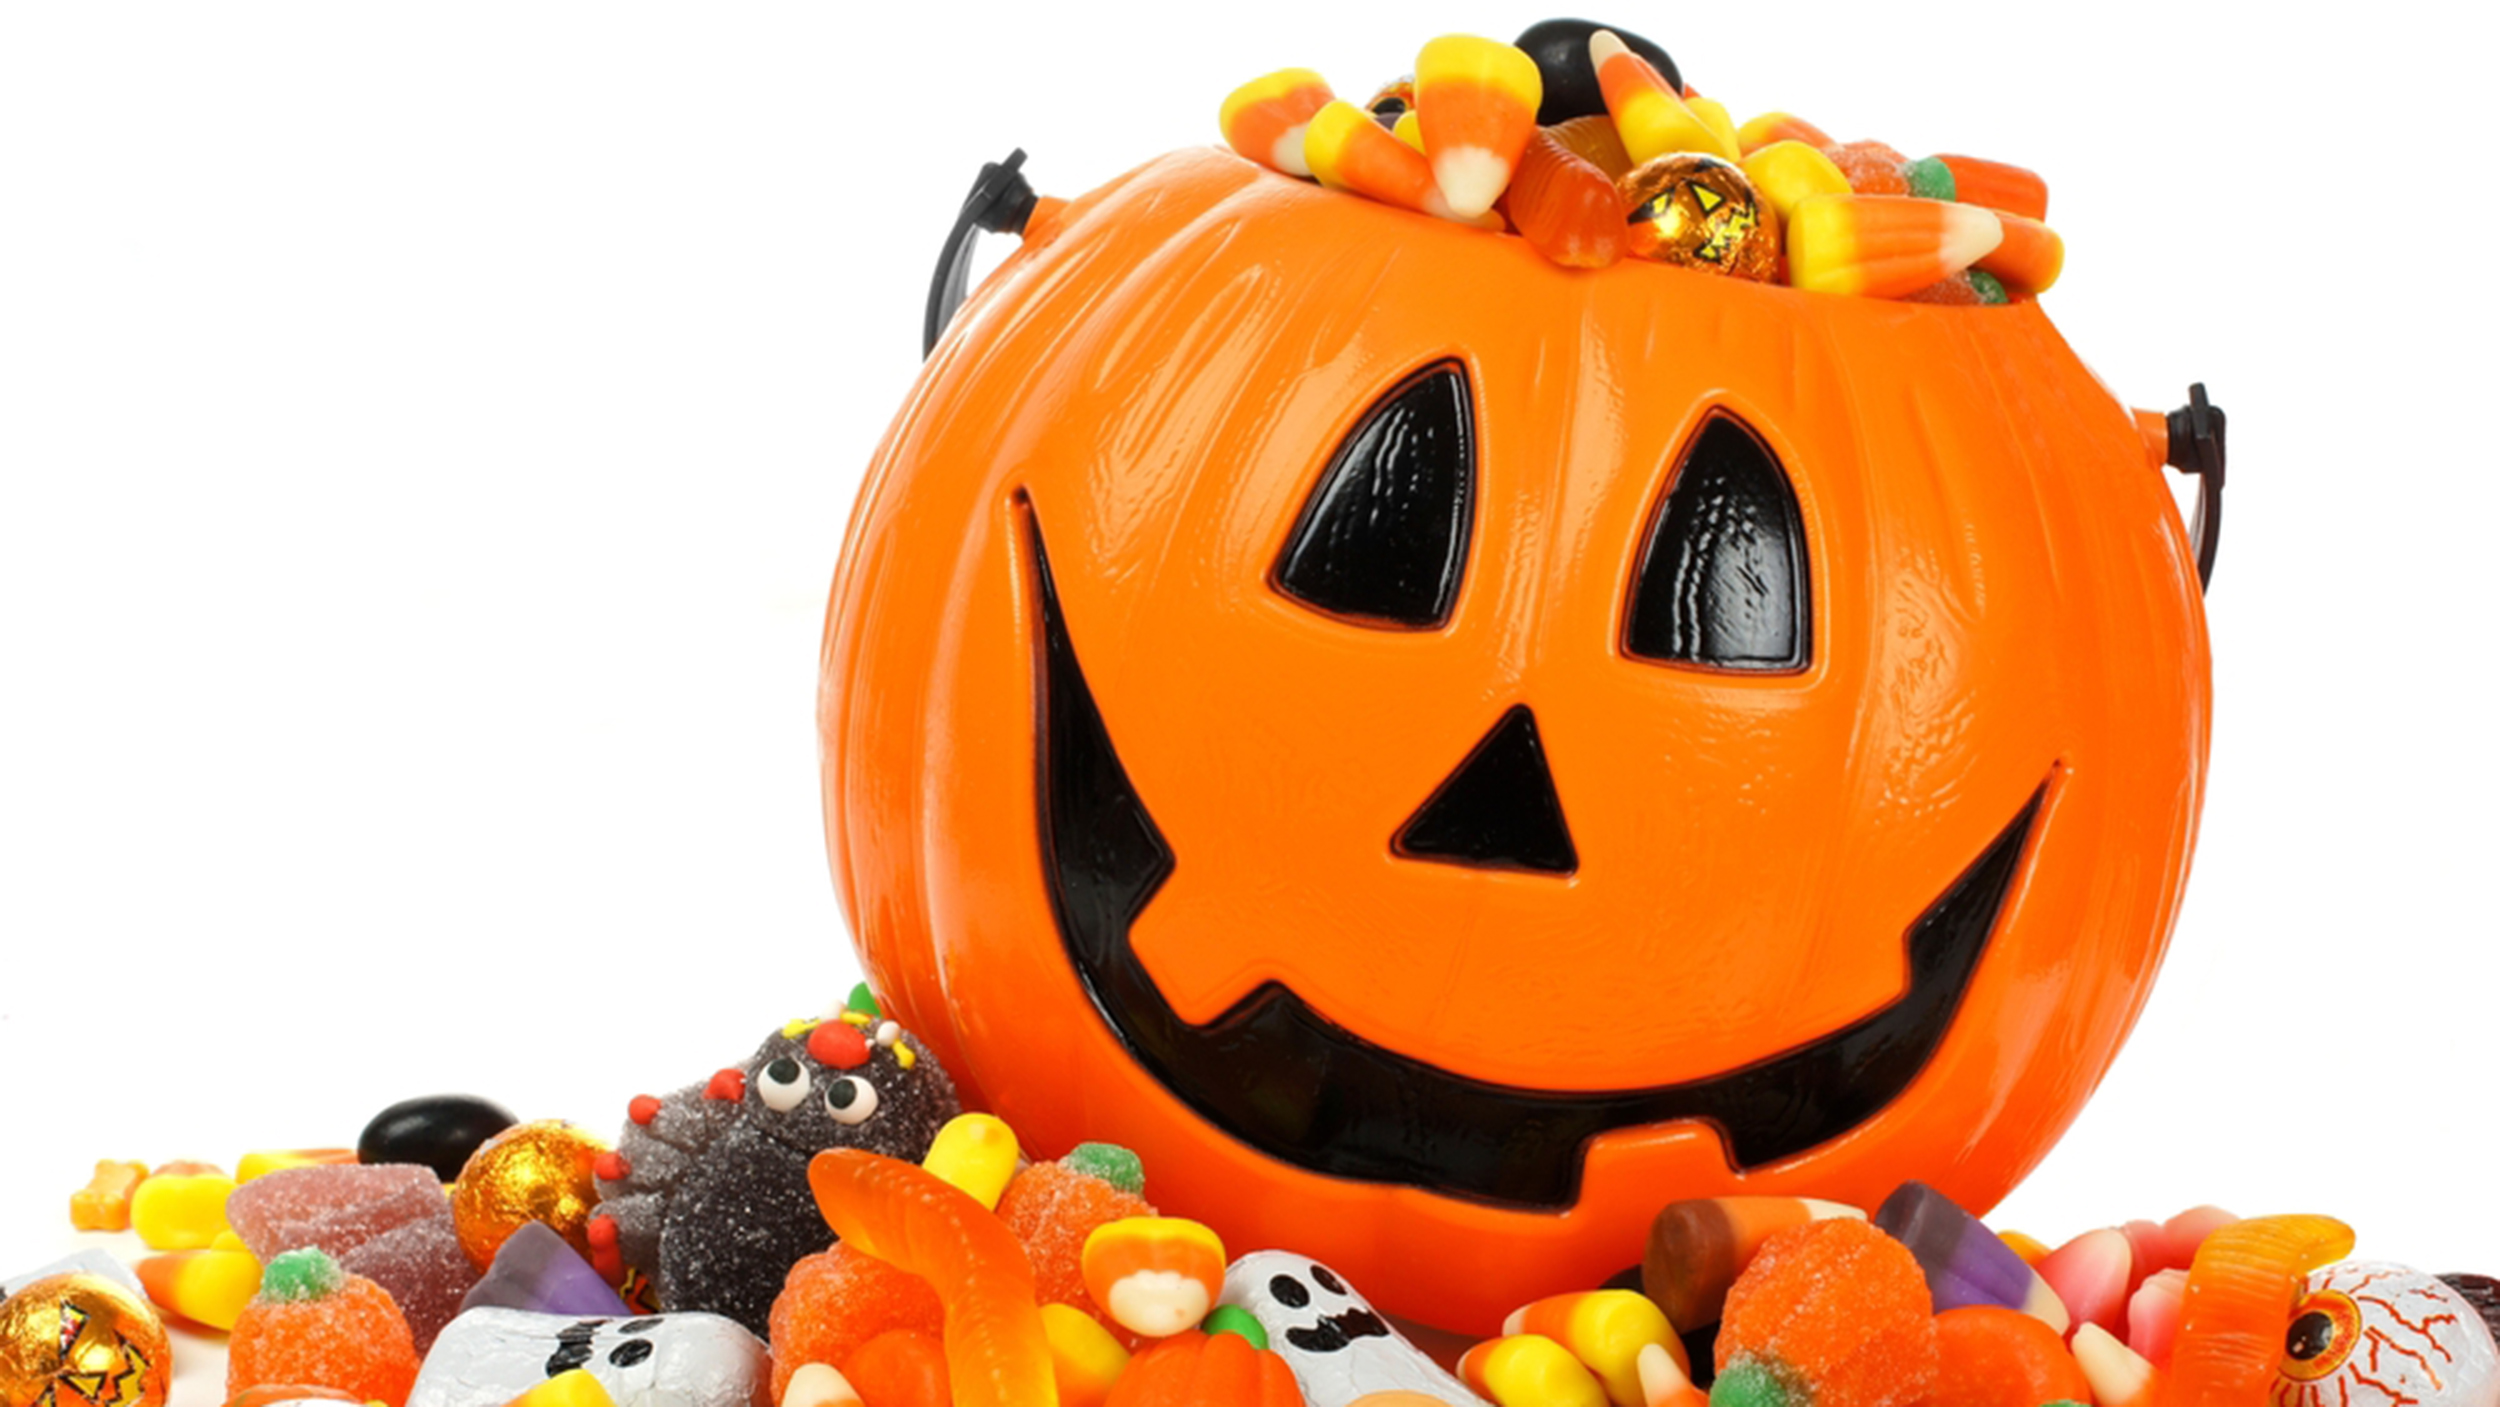 Halloween candy: 8 creative solutions for parents - TODAY.com